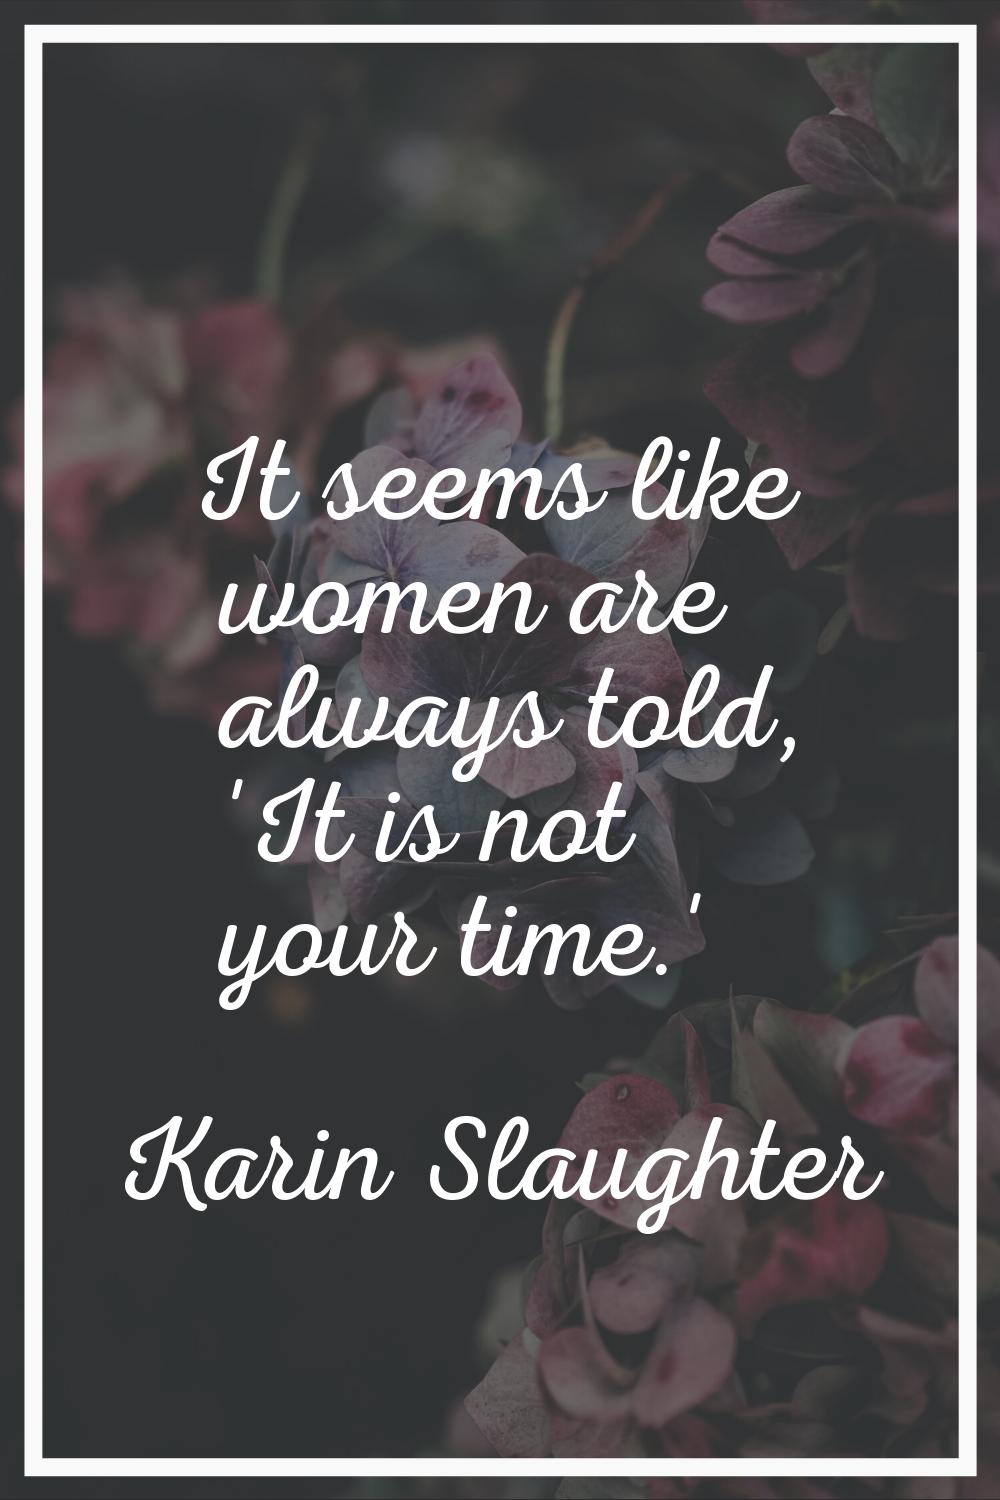 It seems like women are always told, 'It is not your time.'